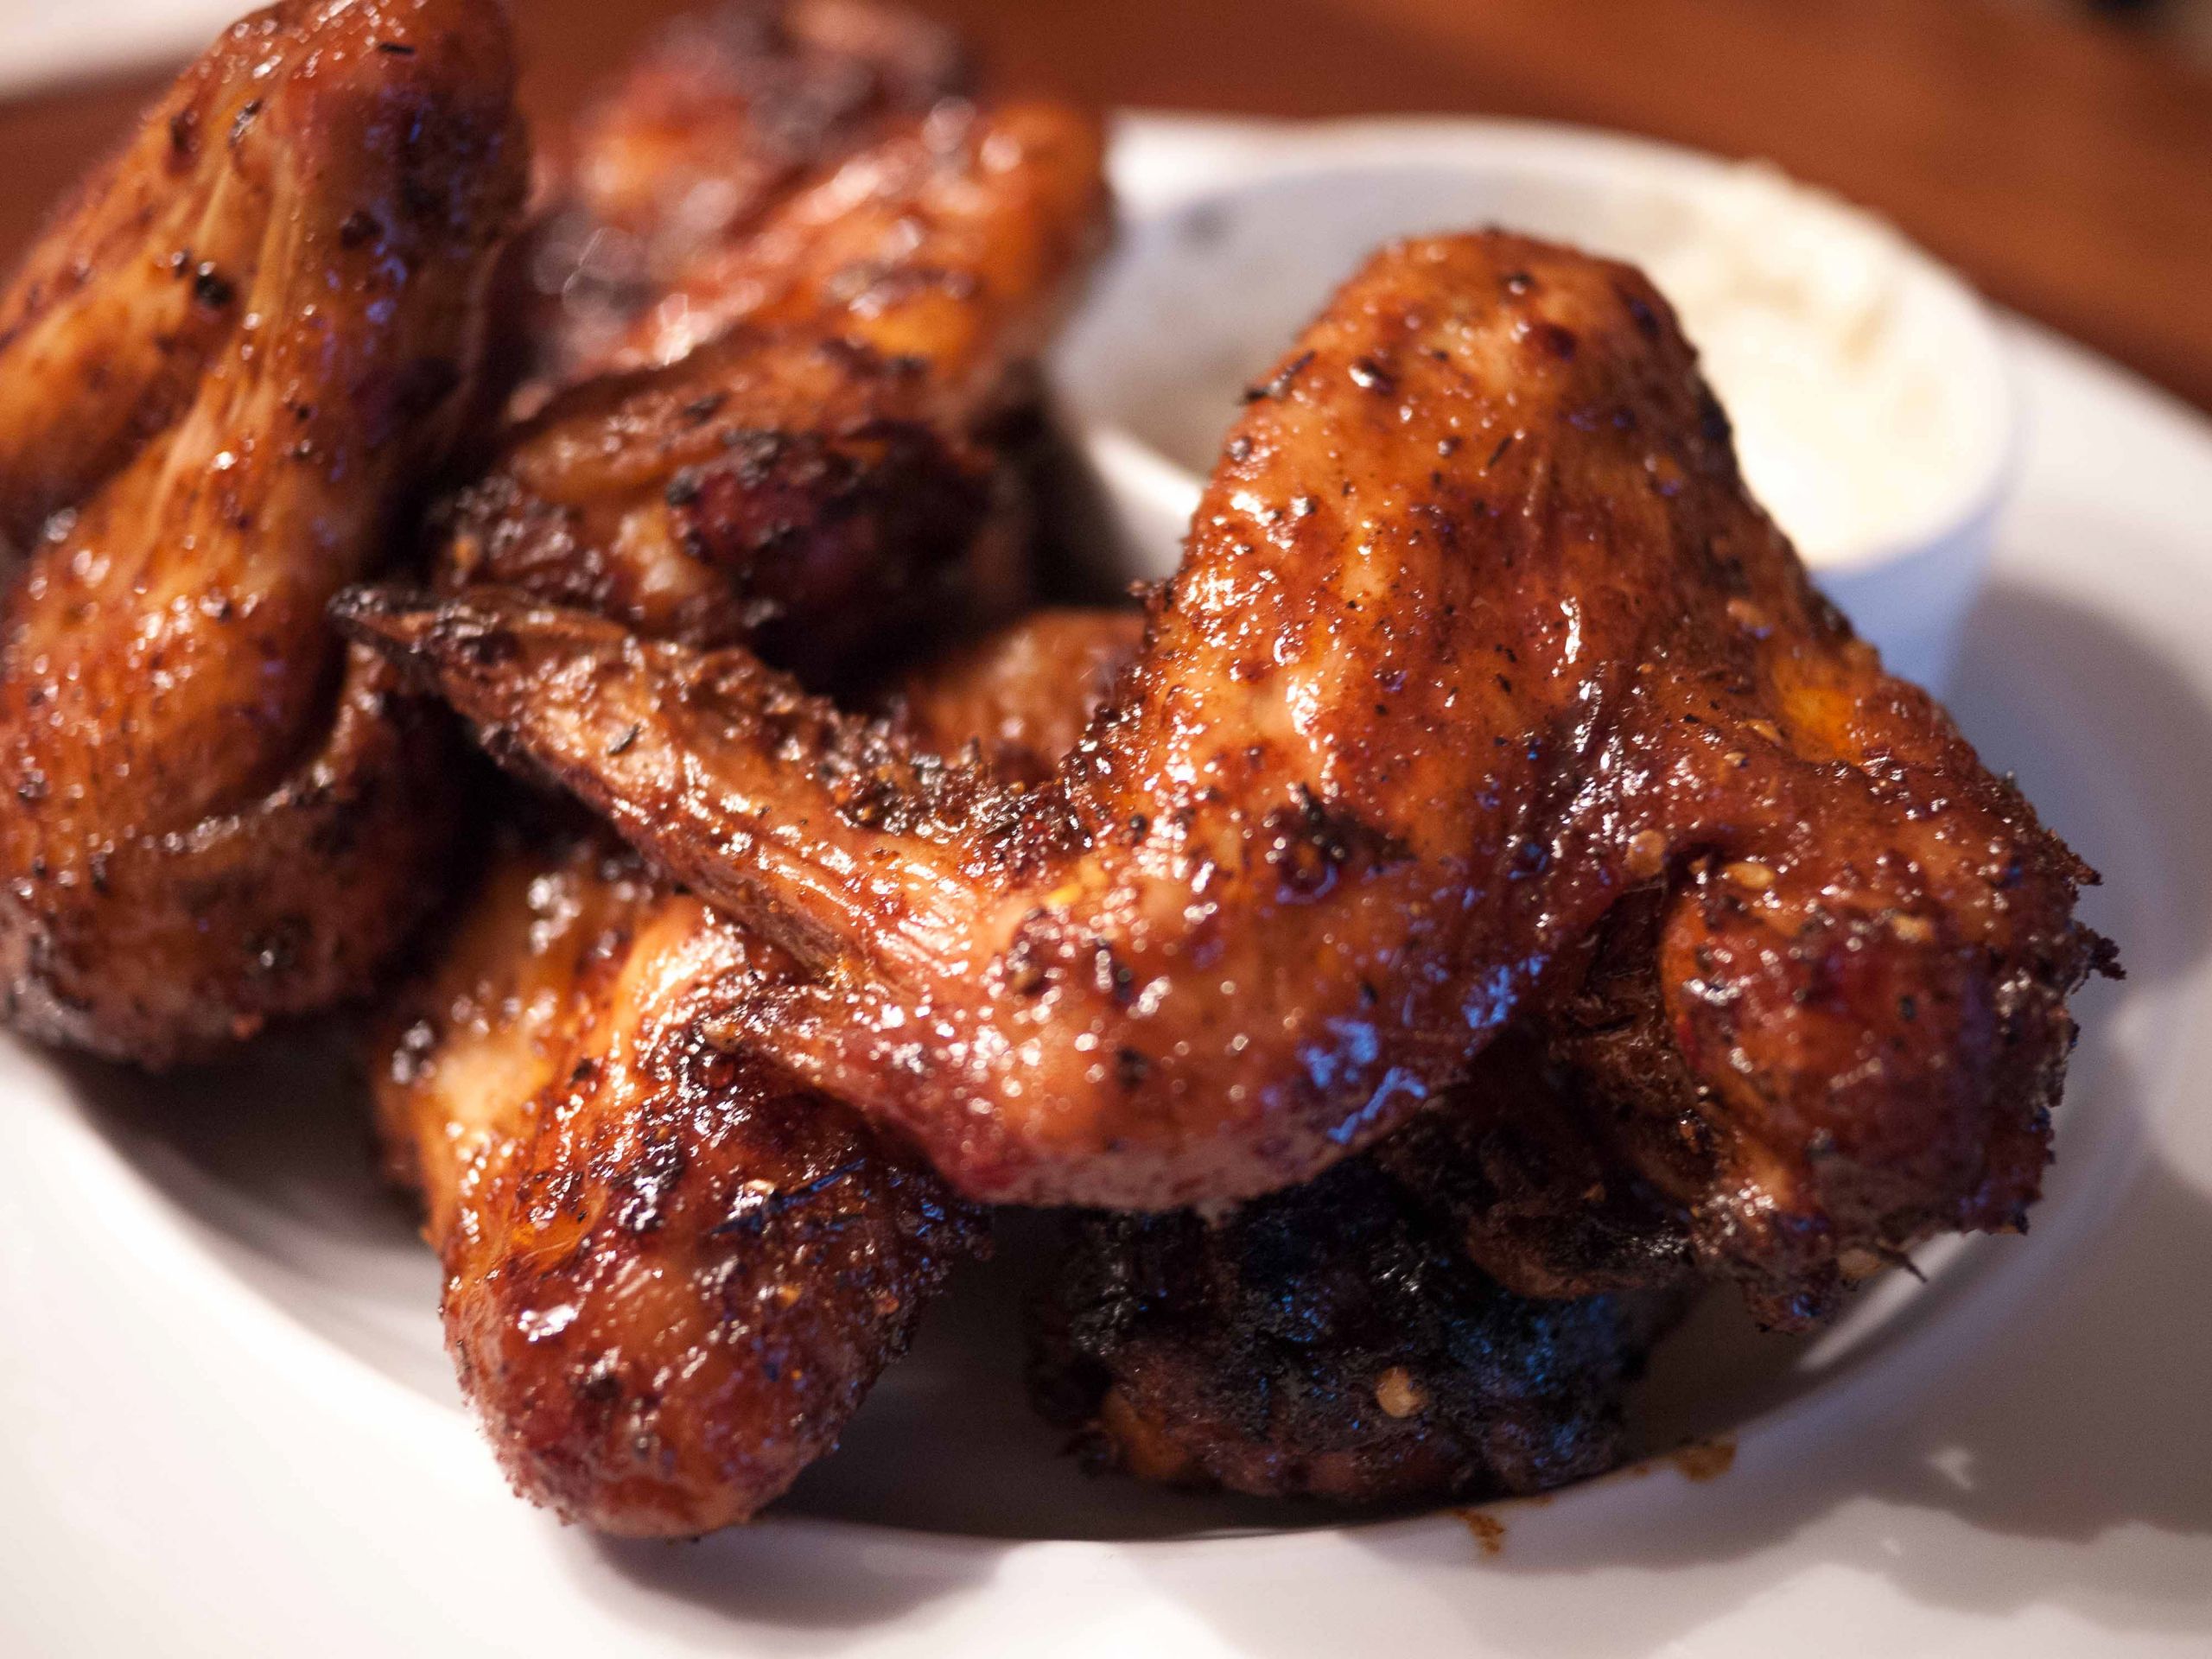 Calories Chicken Wings
 Confusion with chicken wing calories nutrition